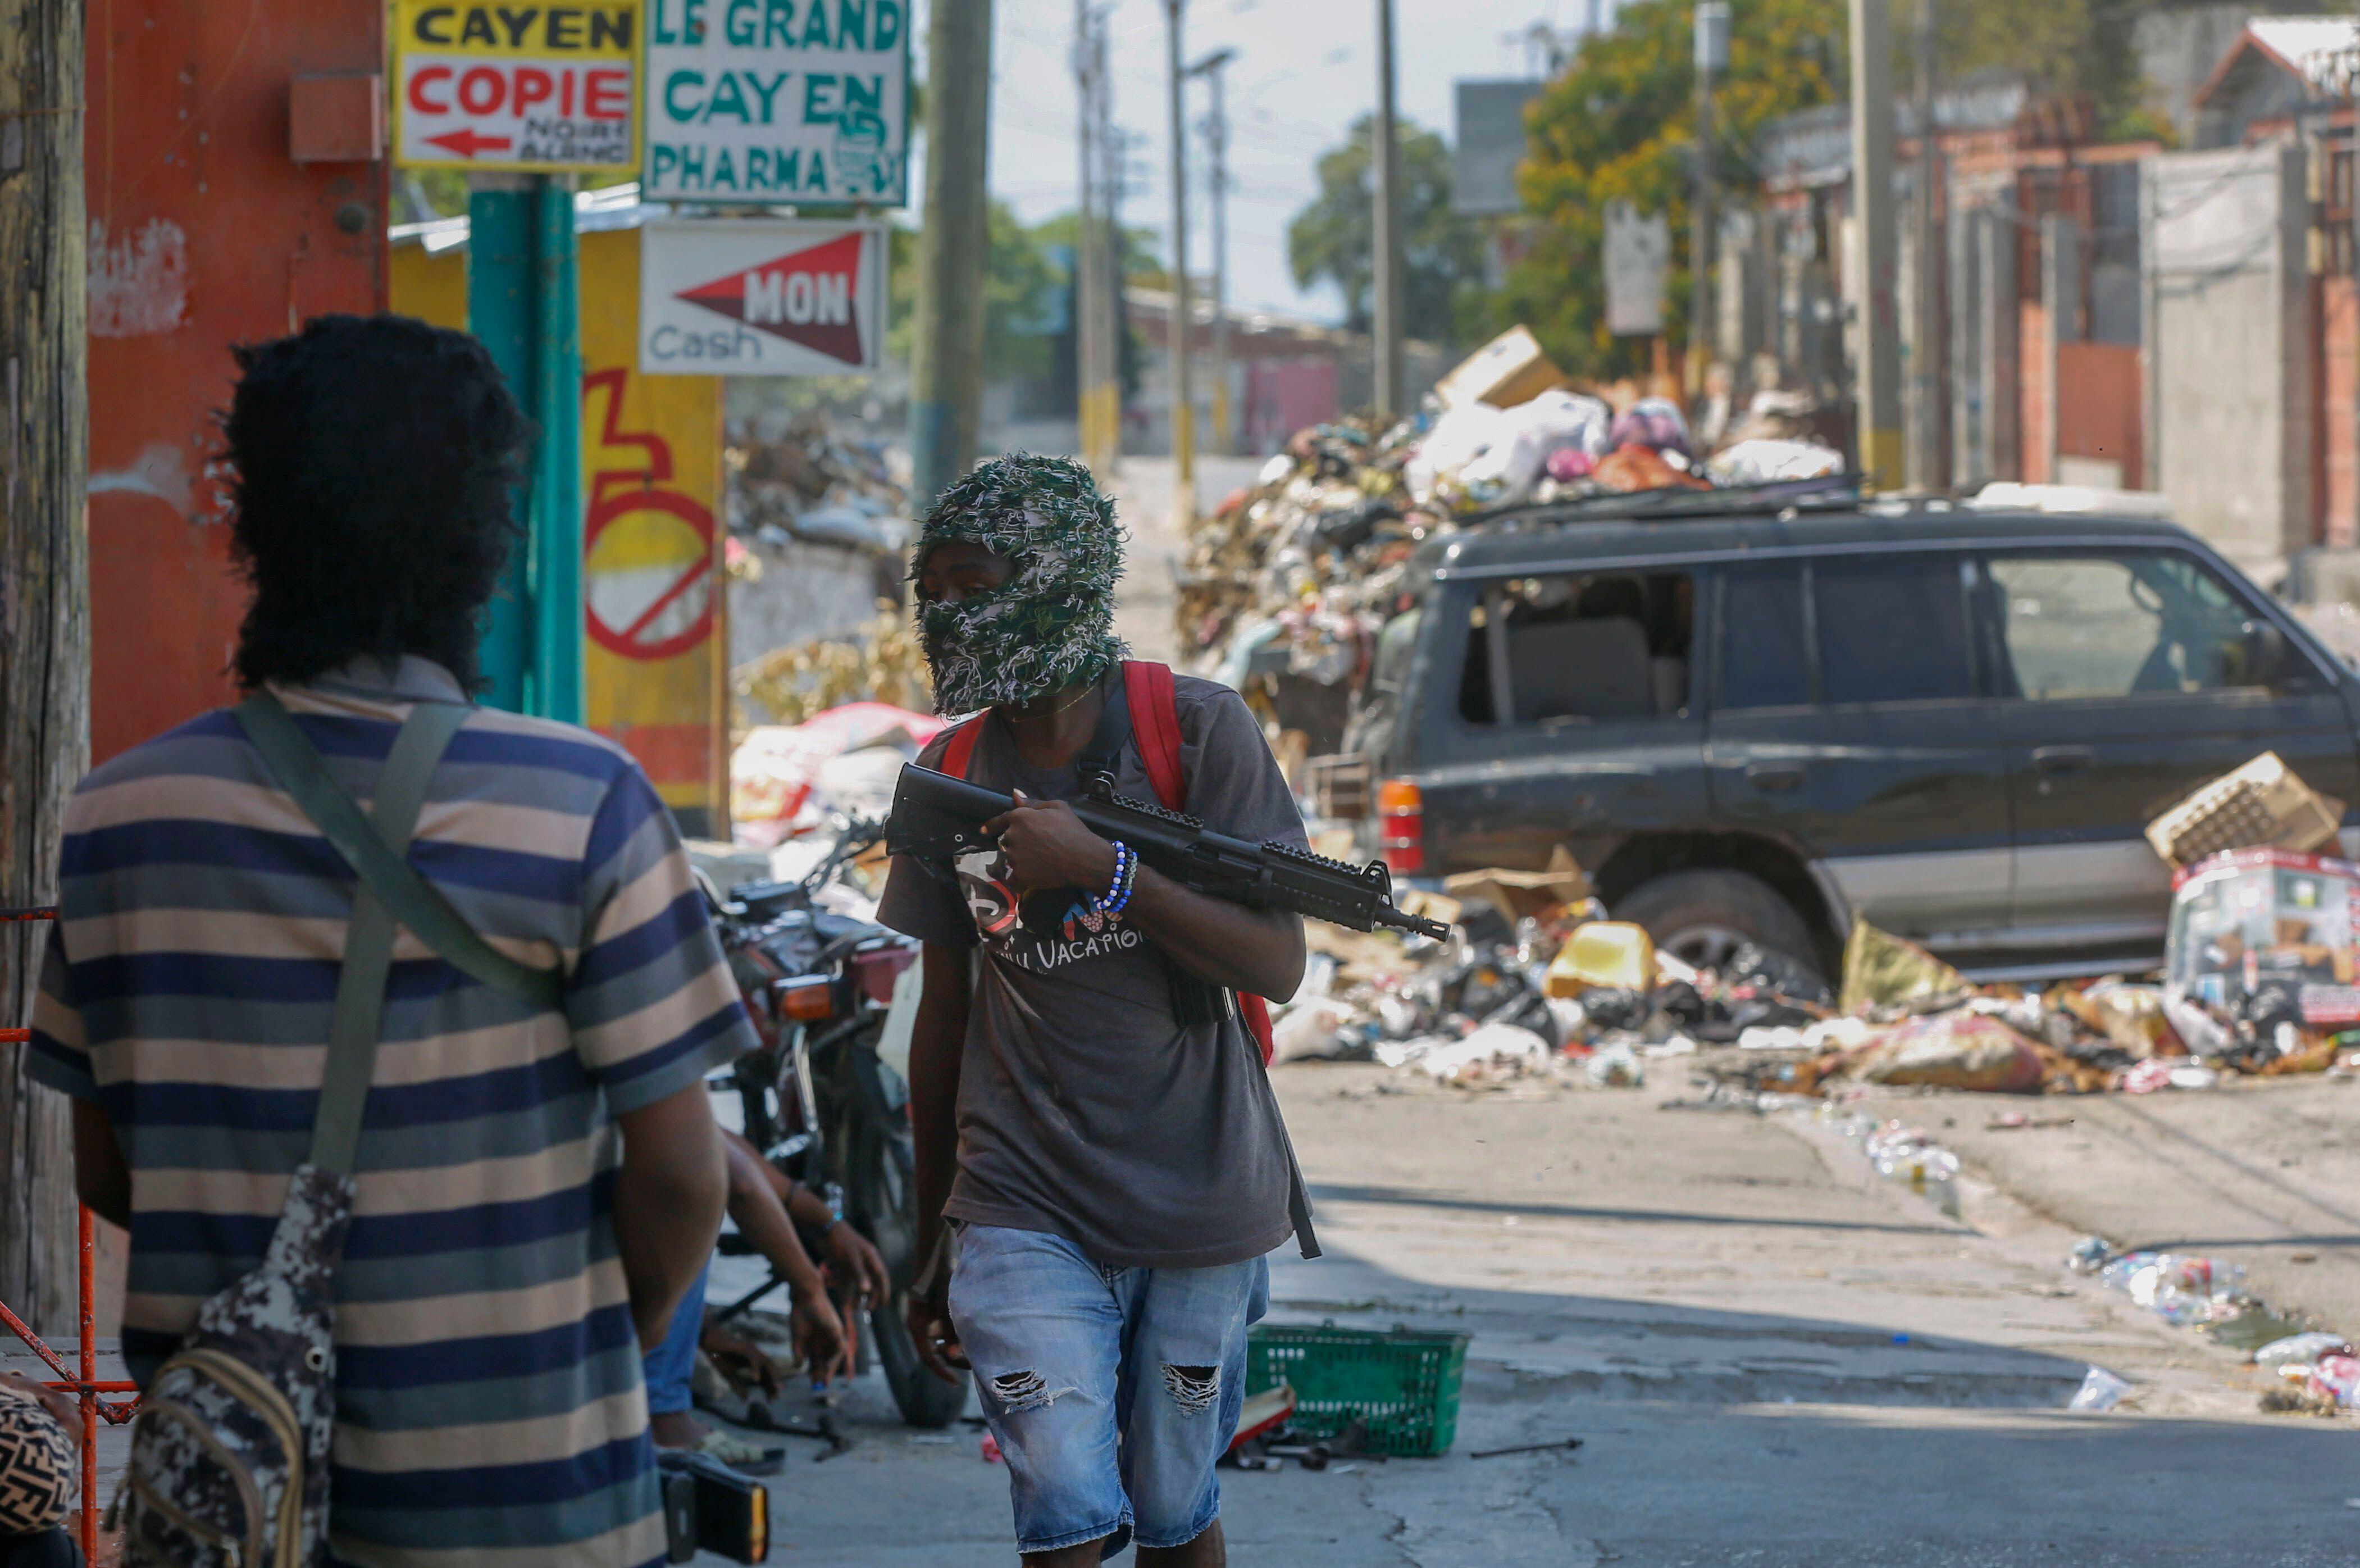 Pax Christi joins bishops’ demand for response to Haitian crisis